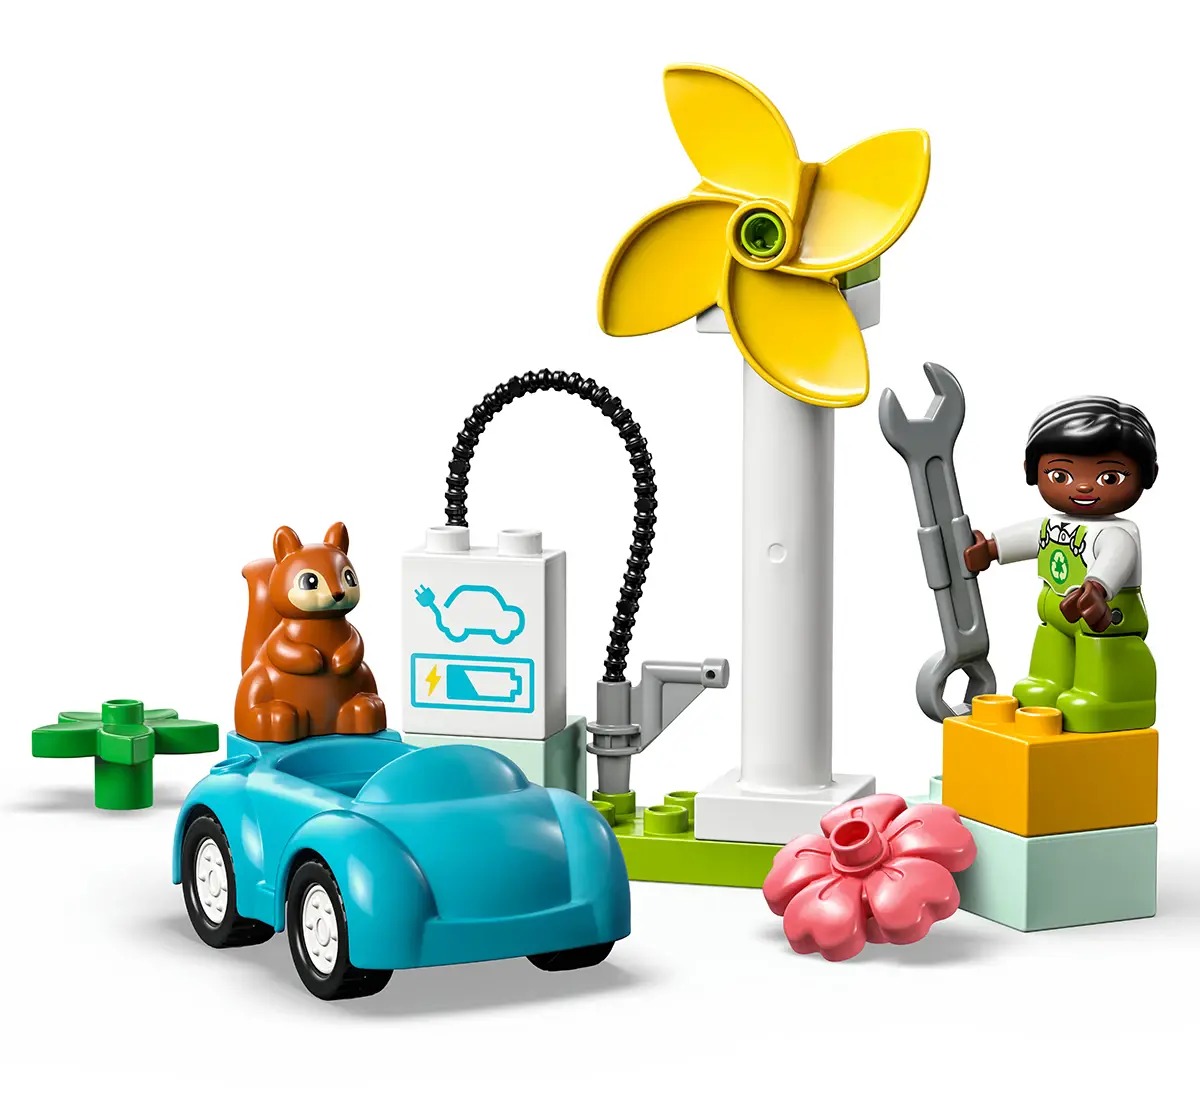 Lego Duplo Town Wind Turbine And Electric Car 10985 Building Toy Set (16 Pieces), 2Y+